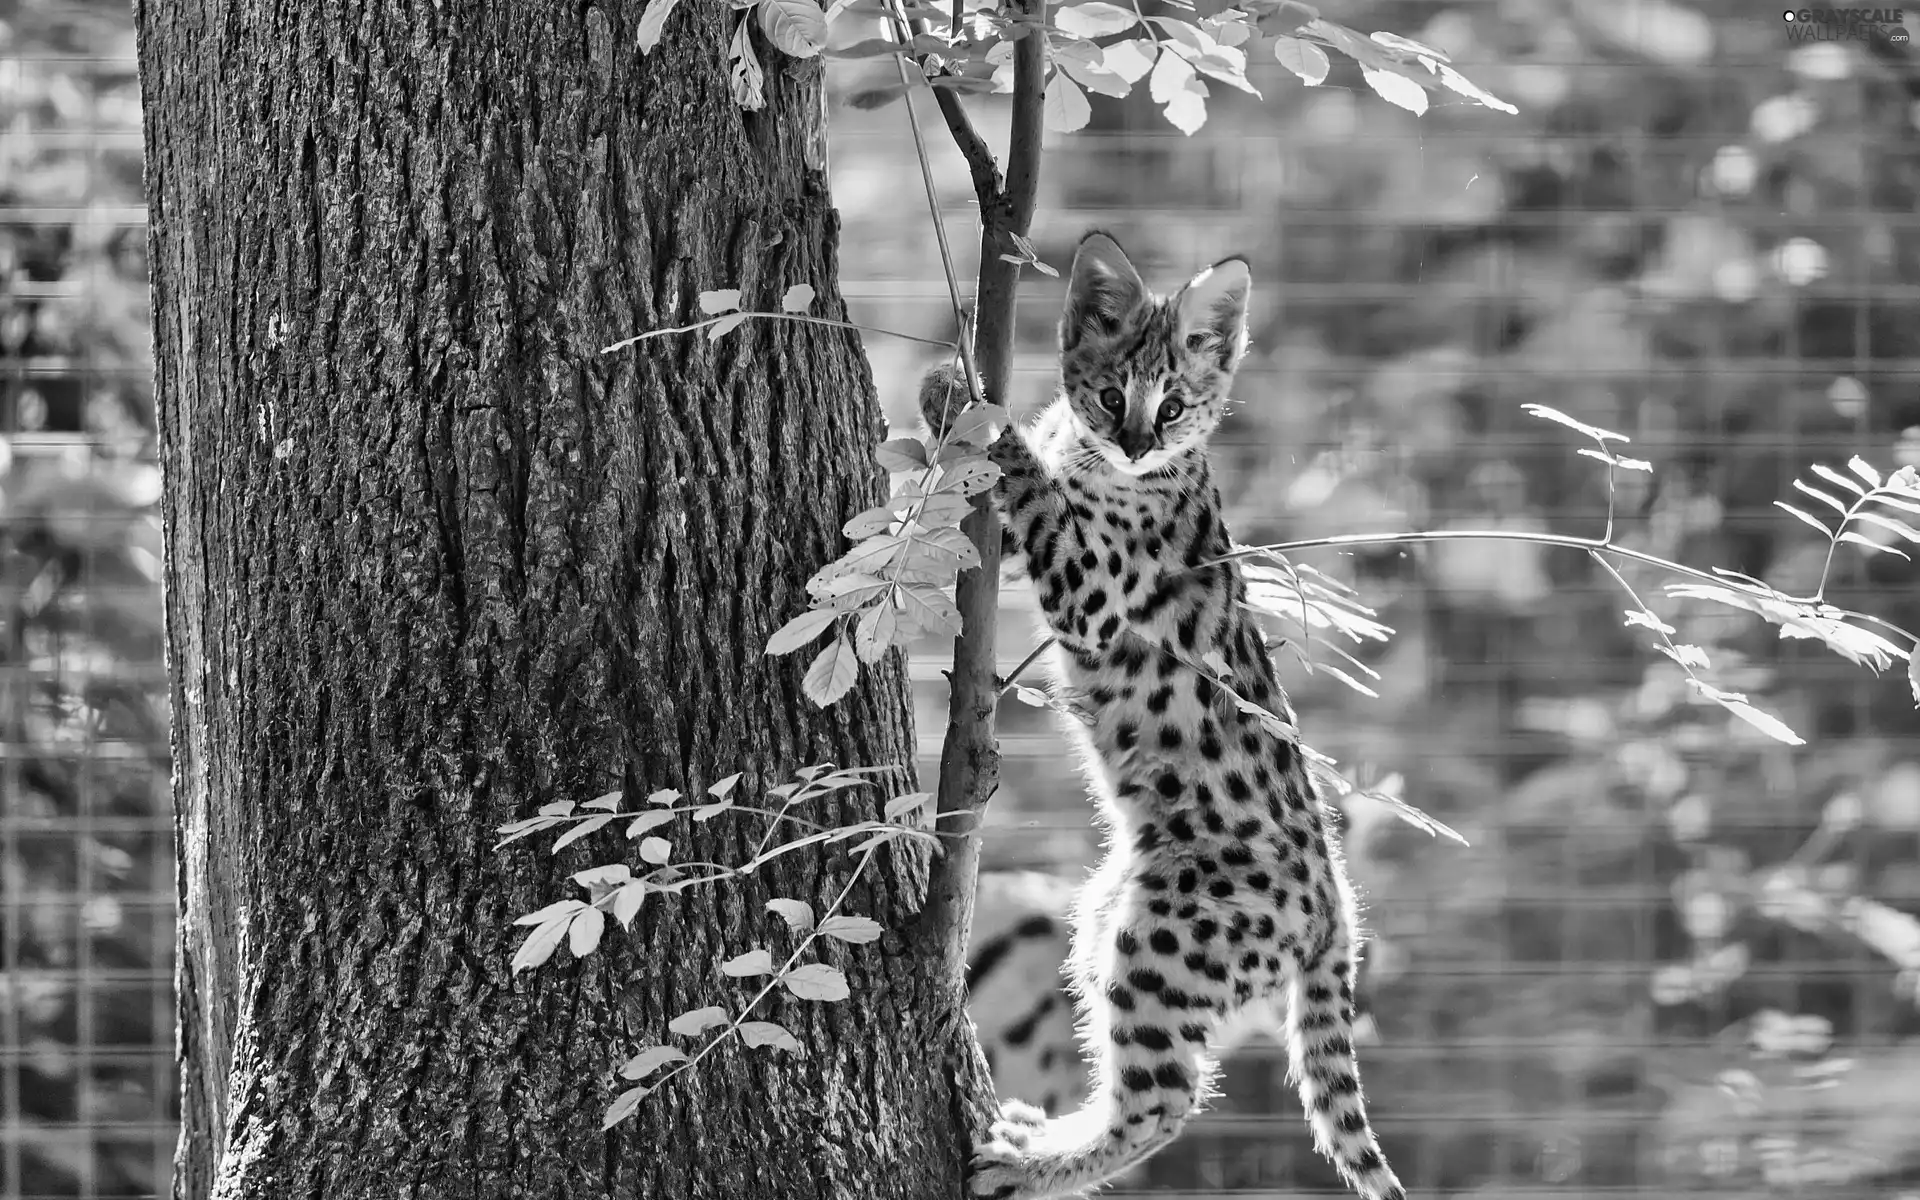 trees, Serval, The look